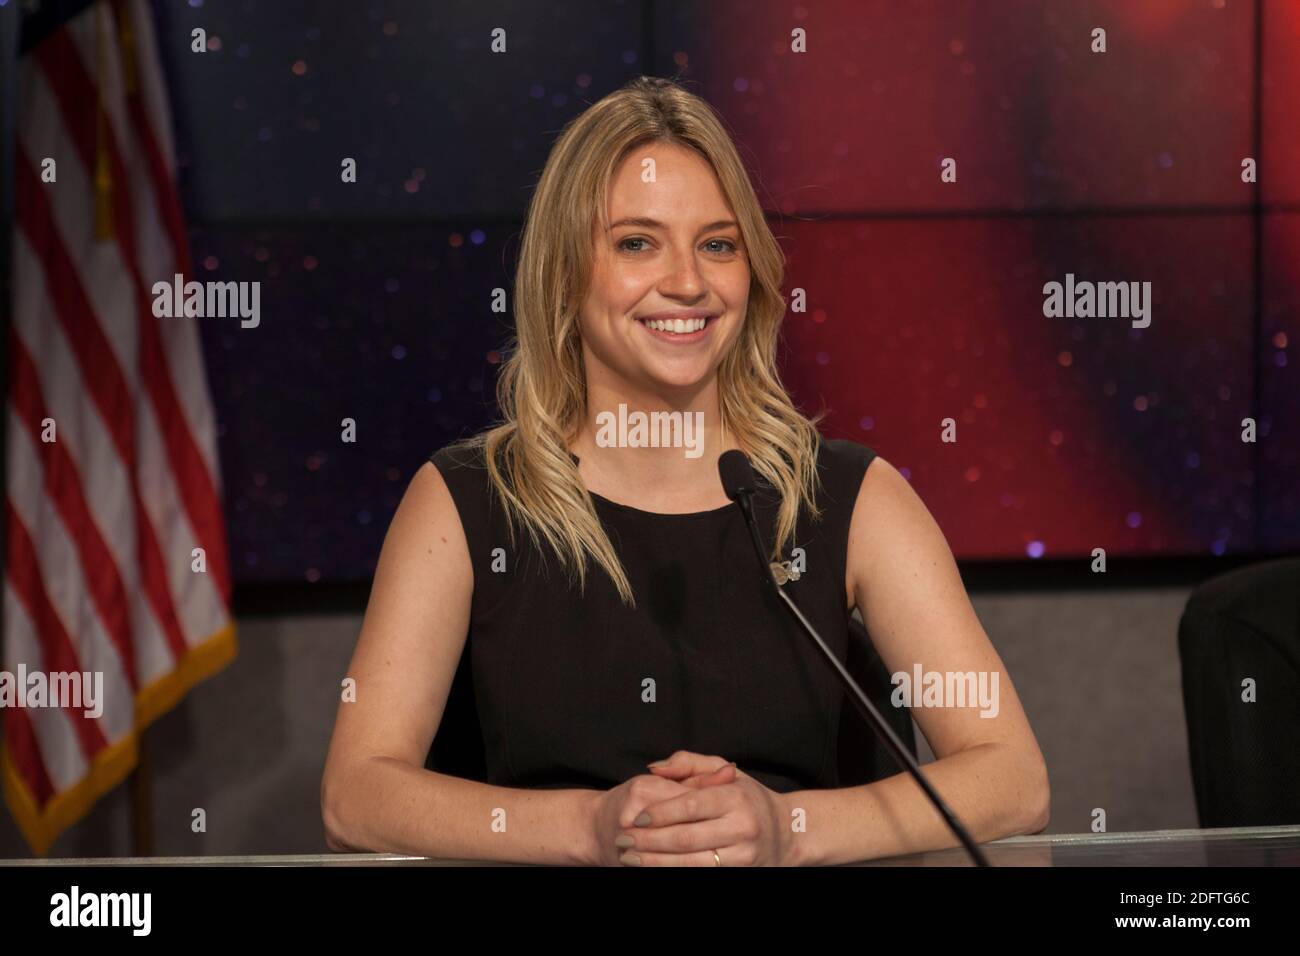 NASA Public Affairs Specialist Claire Saravia speaks during the pre-launch mission briefing for the NASA Transitioning Exoplanet Survey Satellite (TESS) launch at the Kennedy Space Center Press Site Auditorium April 15, 2018 in Cape Canaveral, Florida. Stock Photo